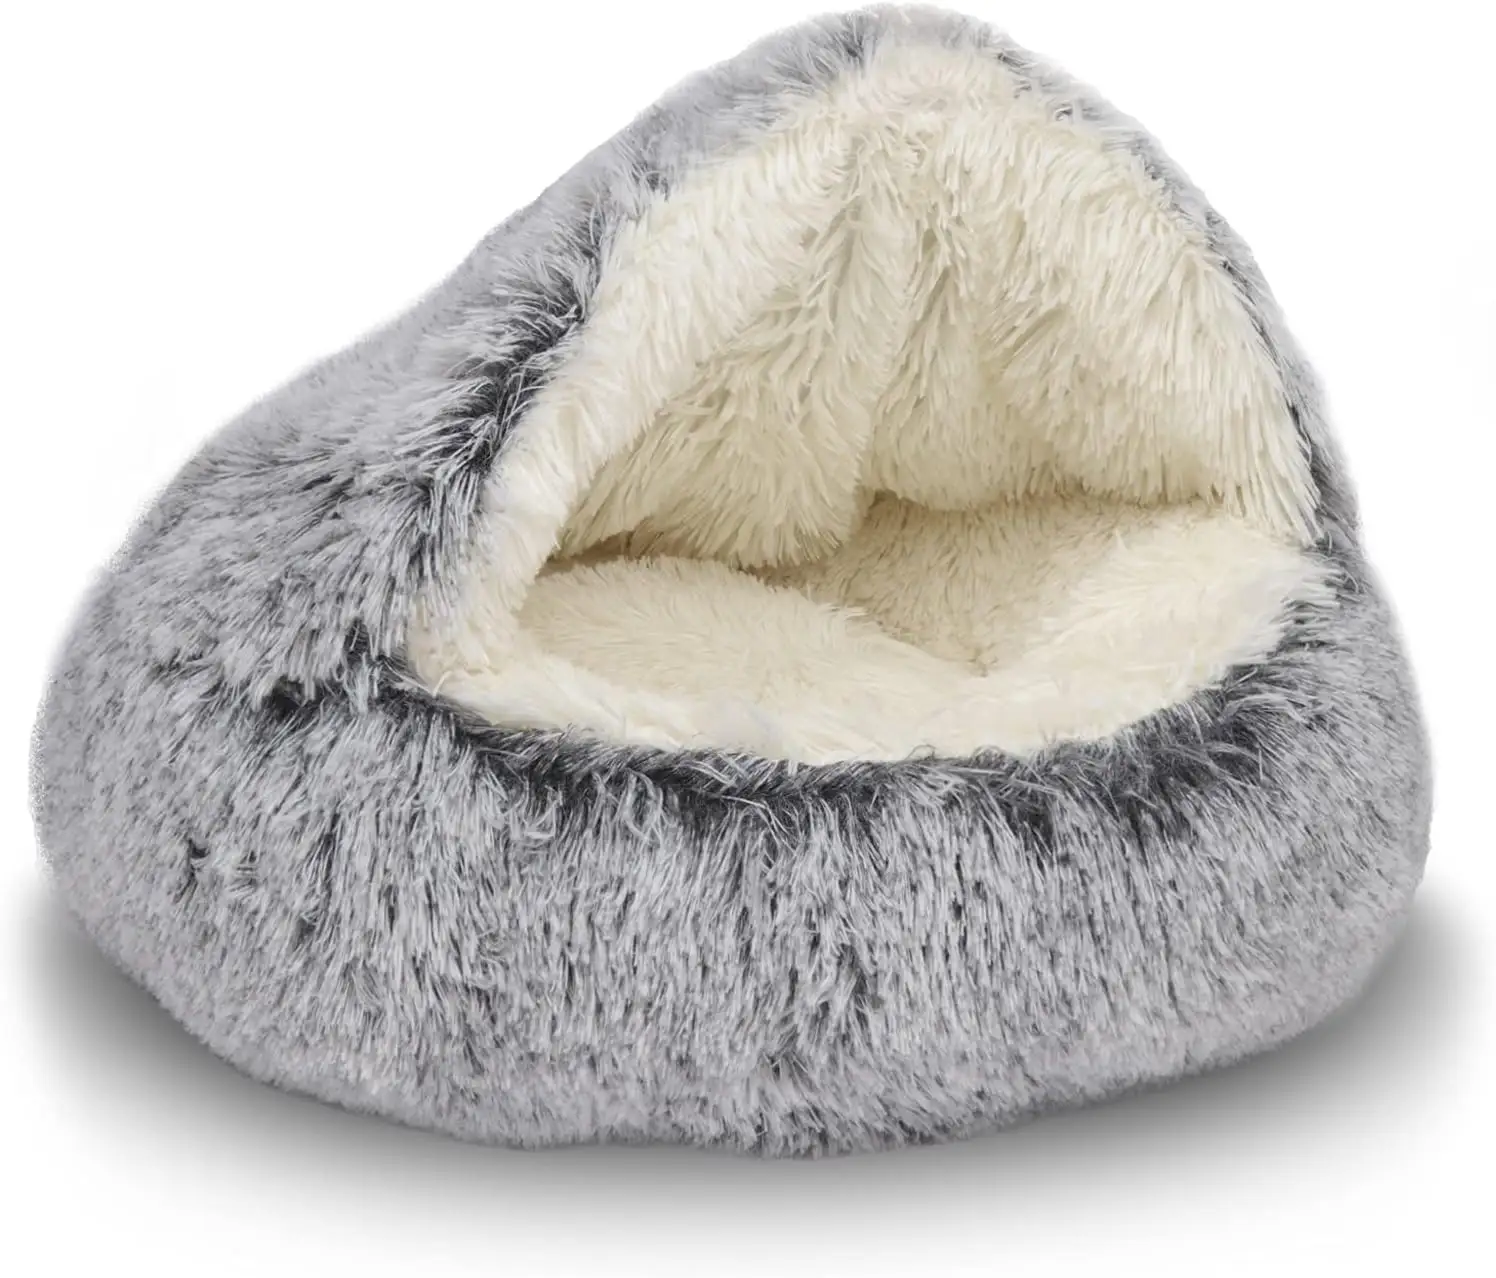 luxury washable non slip fluffy cozy plush winter warm pet cat dog sleeping bed hooded cover donut cave honey bed